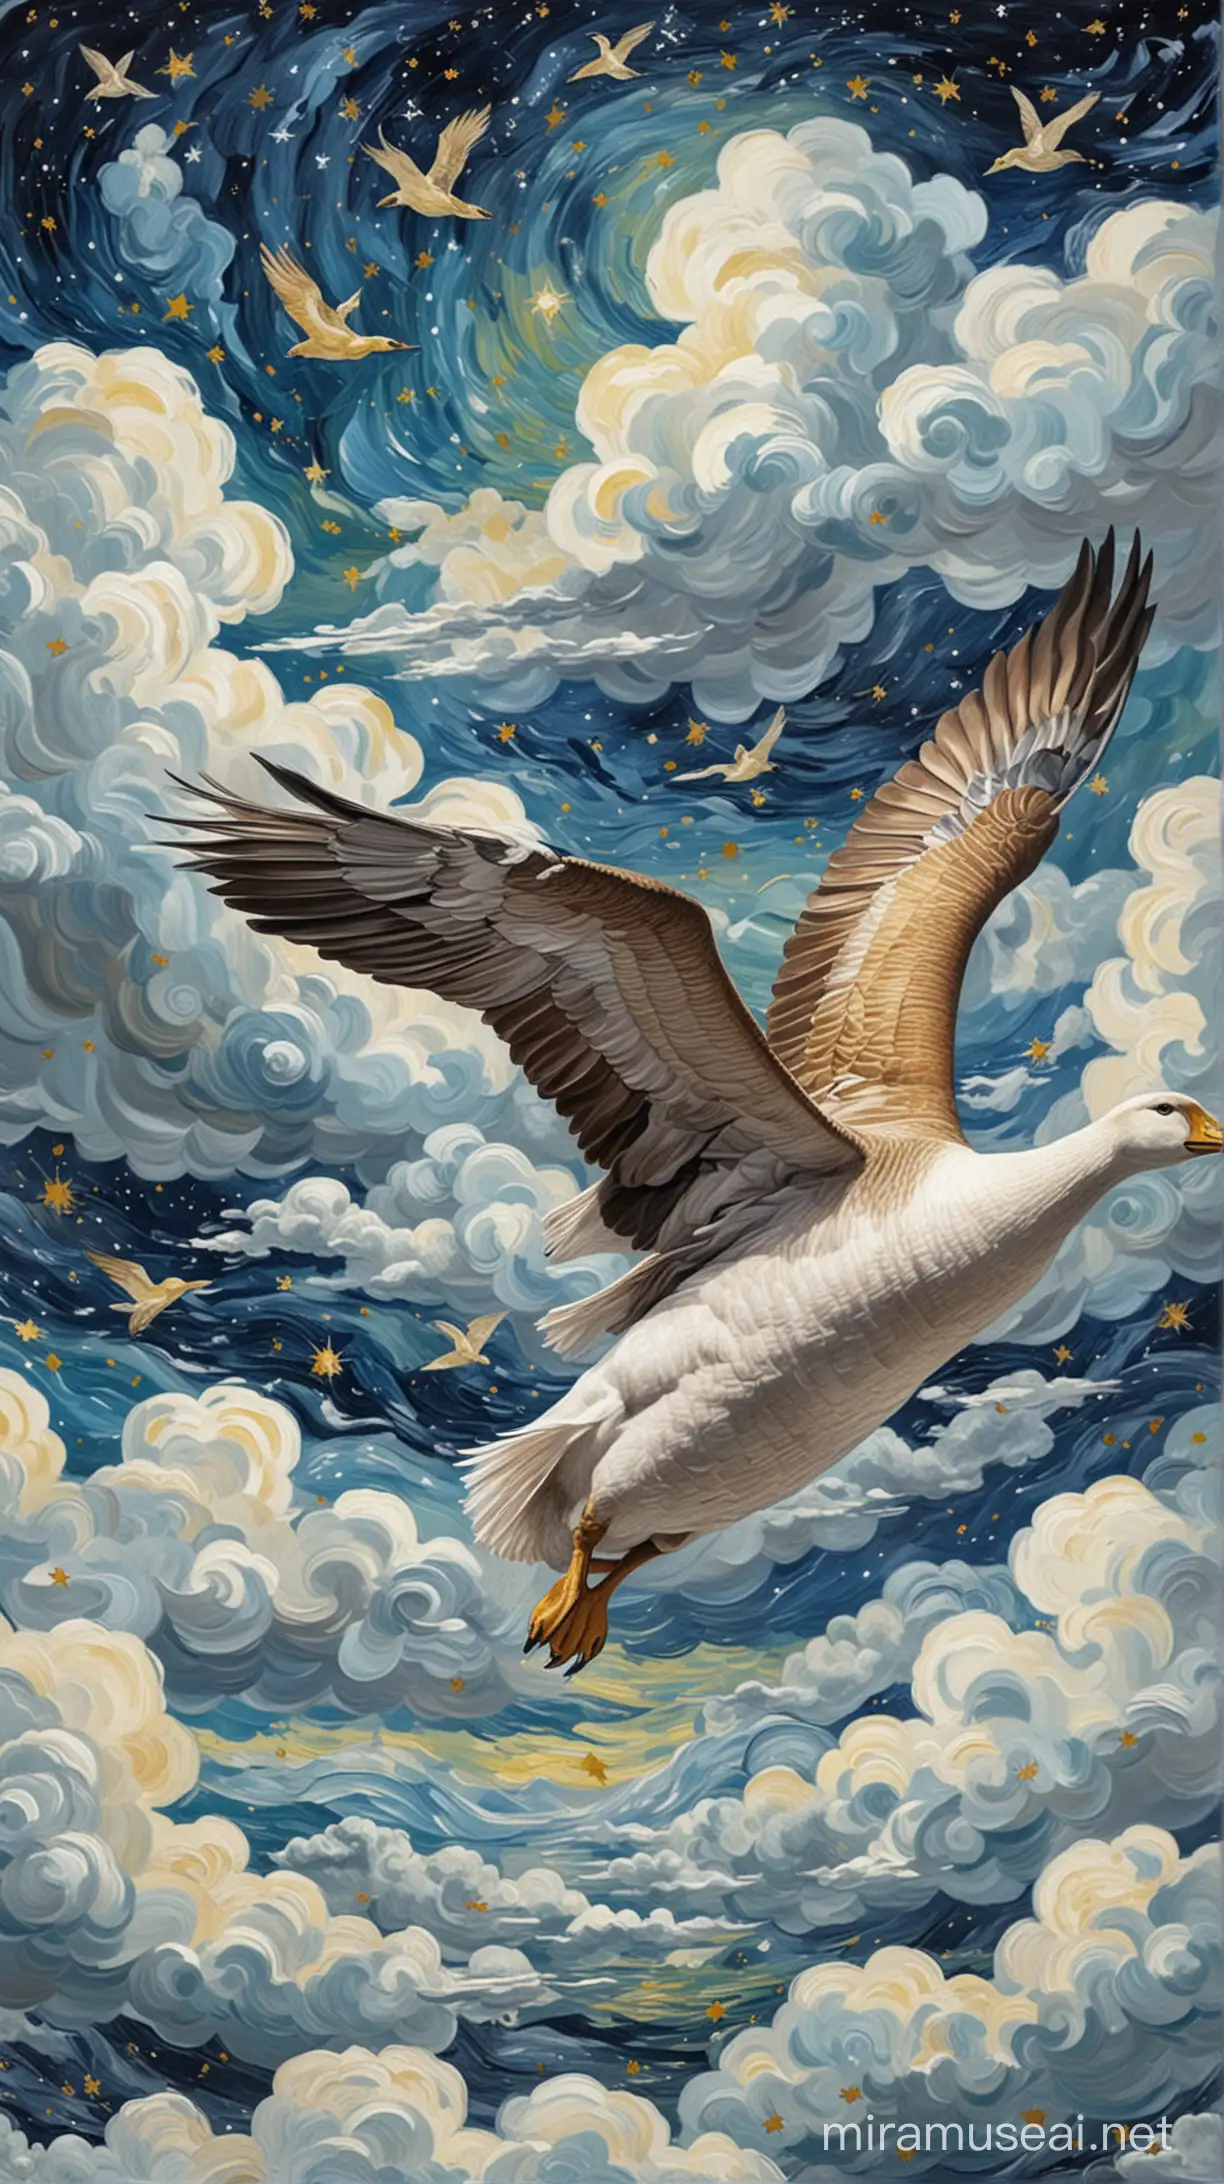 The flight of a goose on white clouds inspired by Van Gogh's starry night design